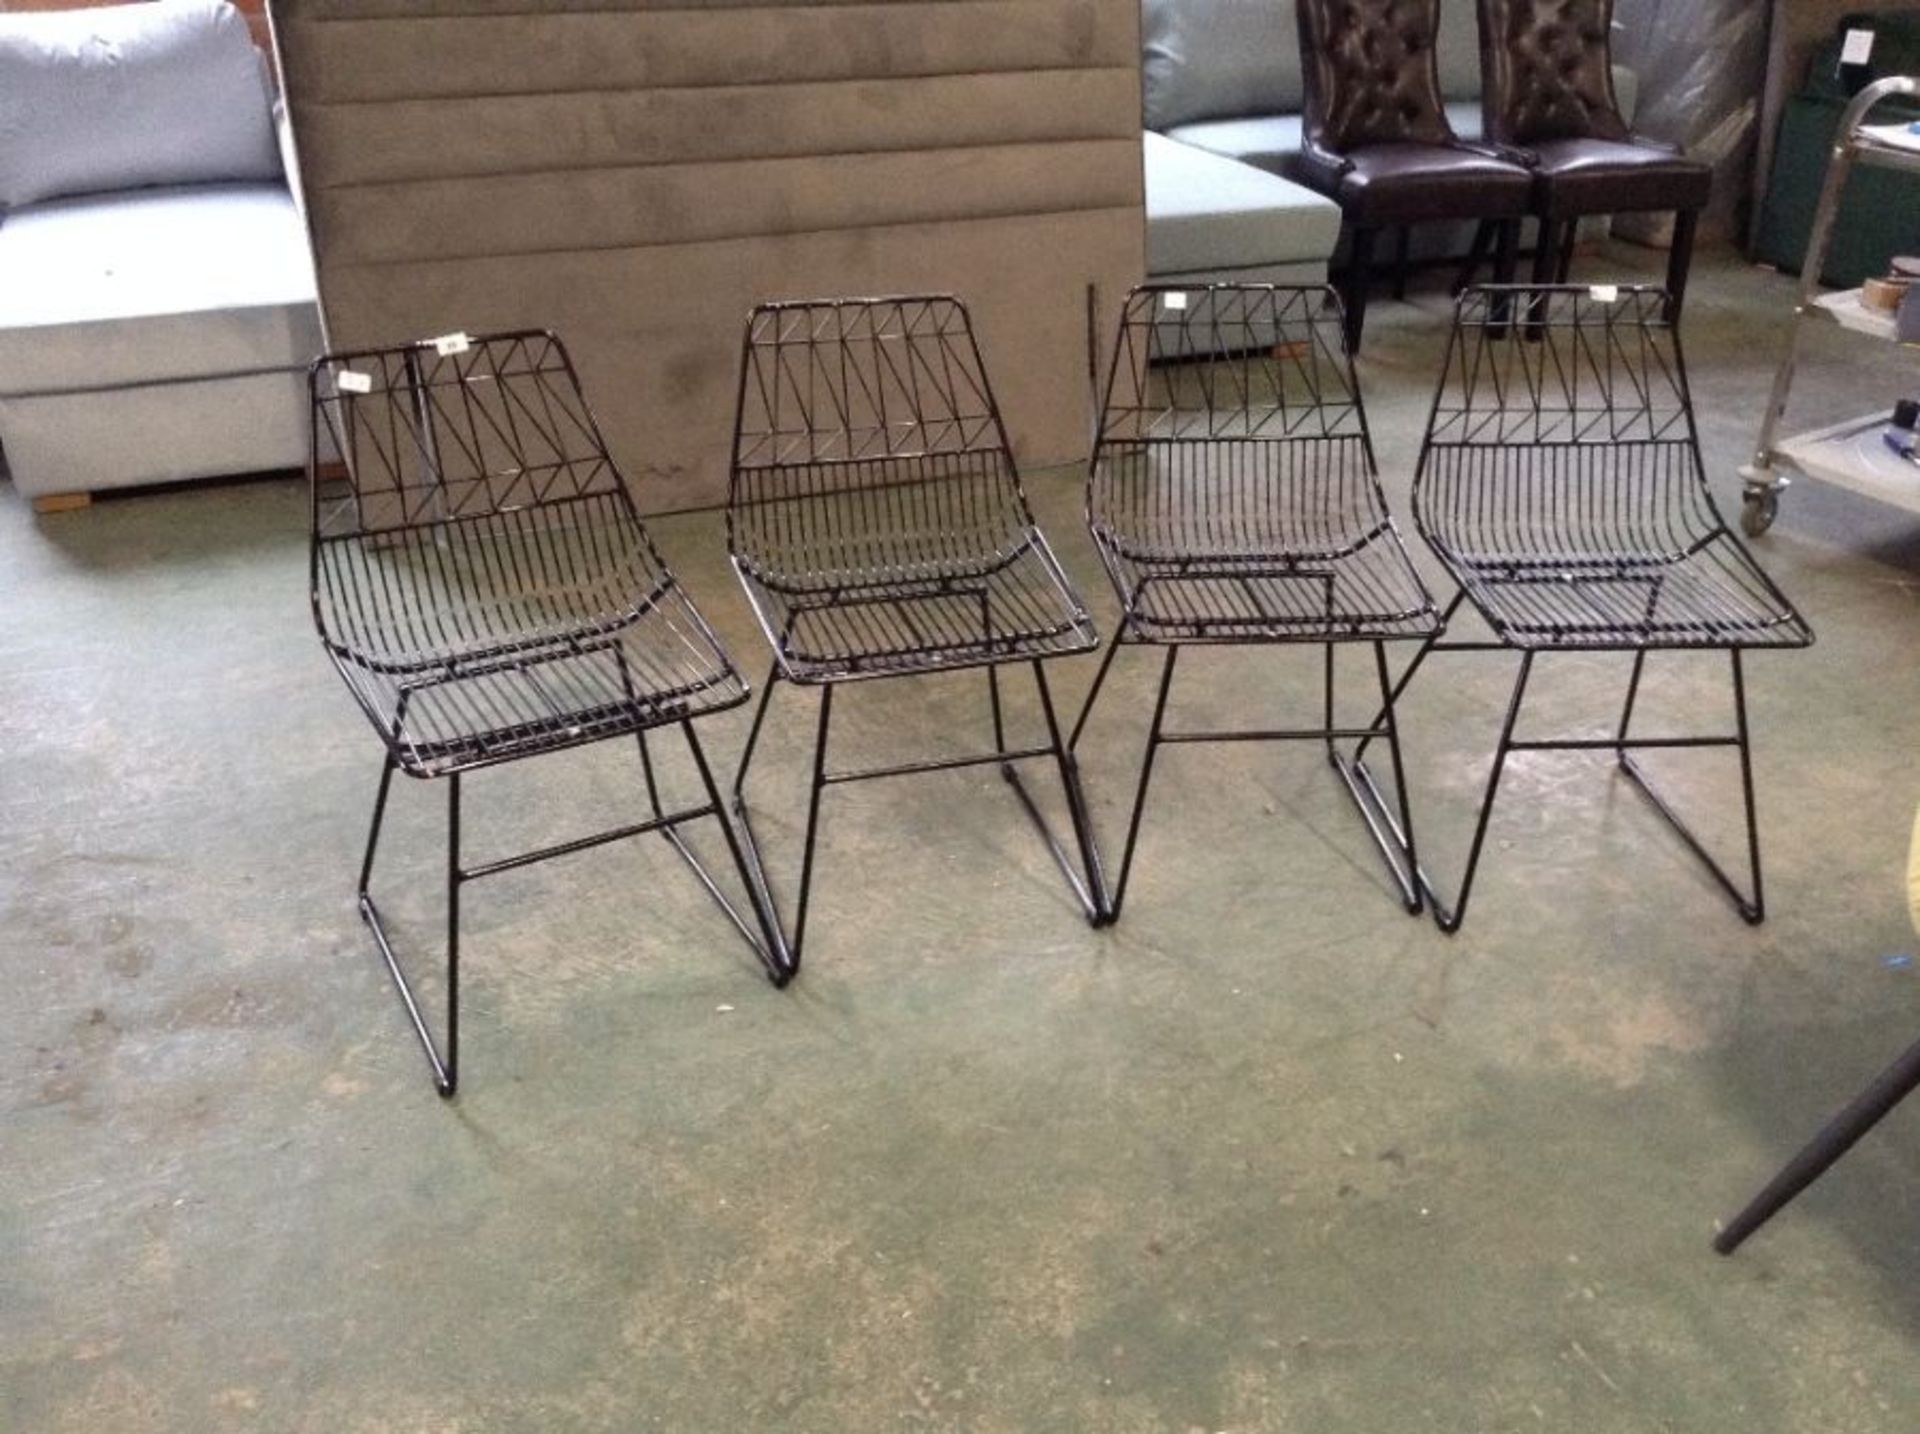 ASTRID SET OF 4 METAL CHAIRS (22779-6, 22587-7, 22